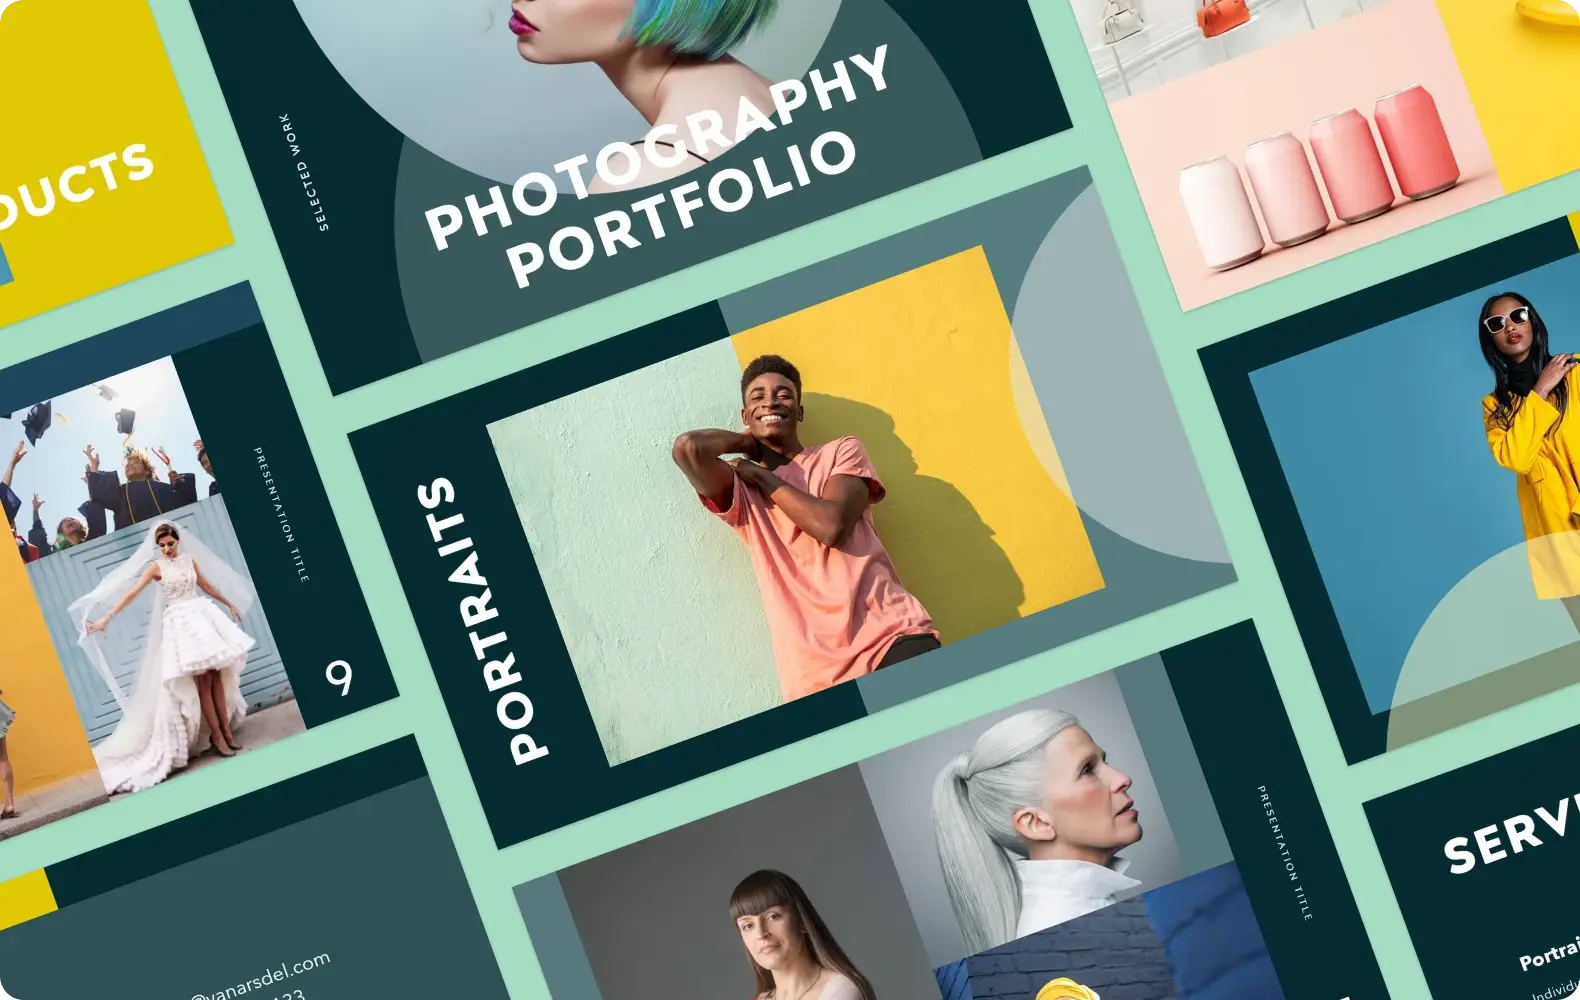 Images from a photography portfolio template for PowerPoint.